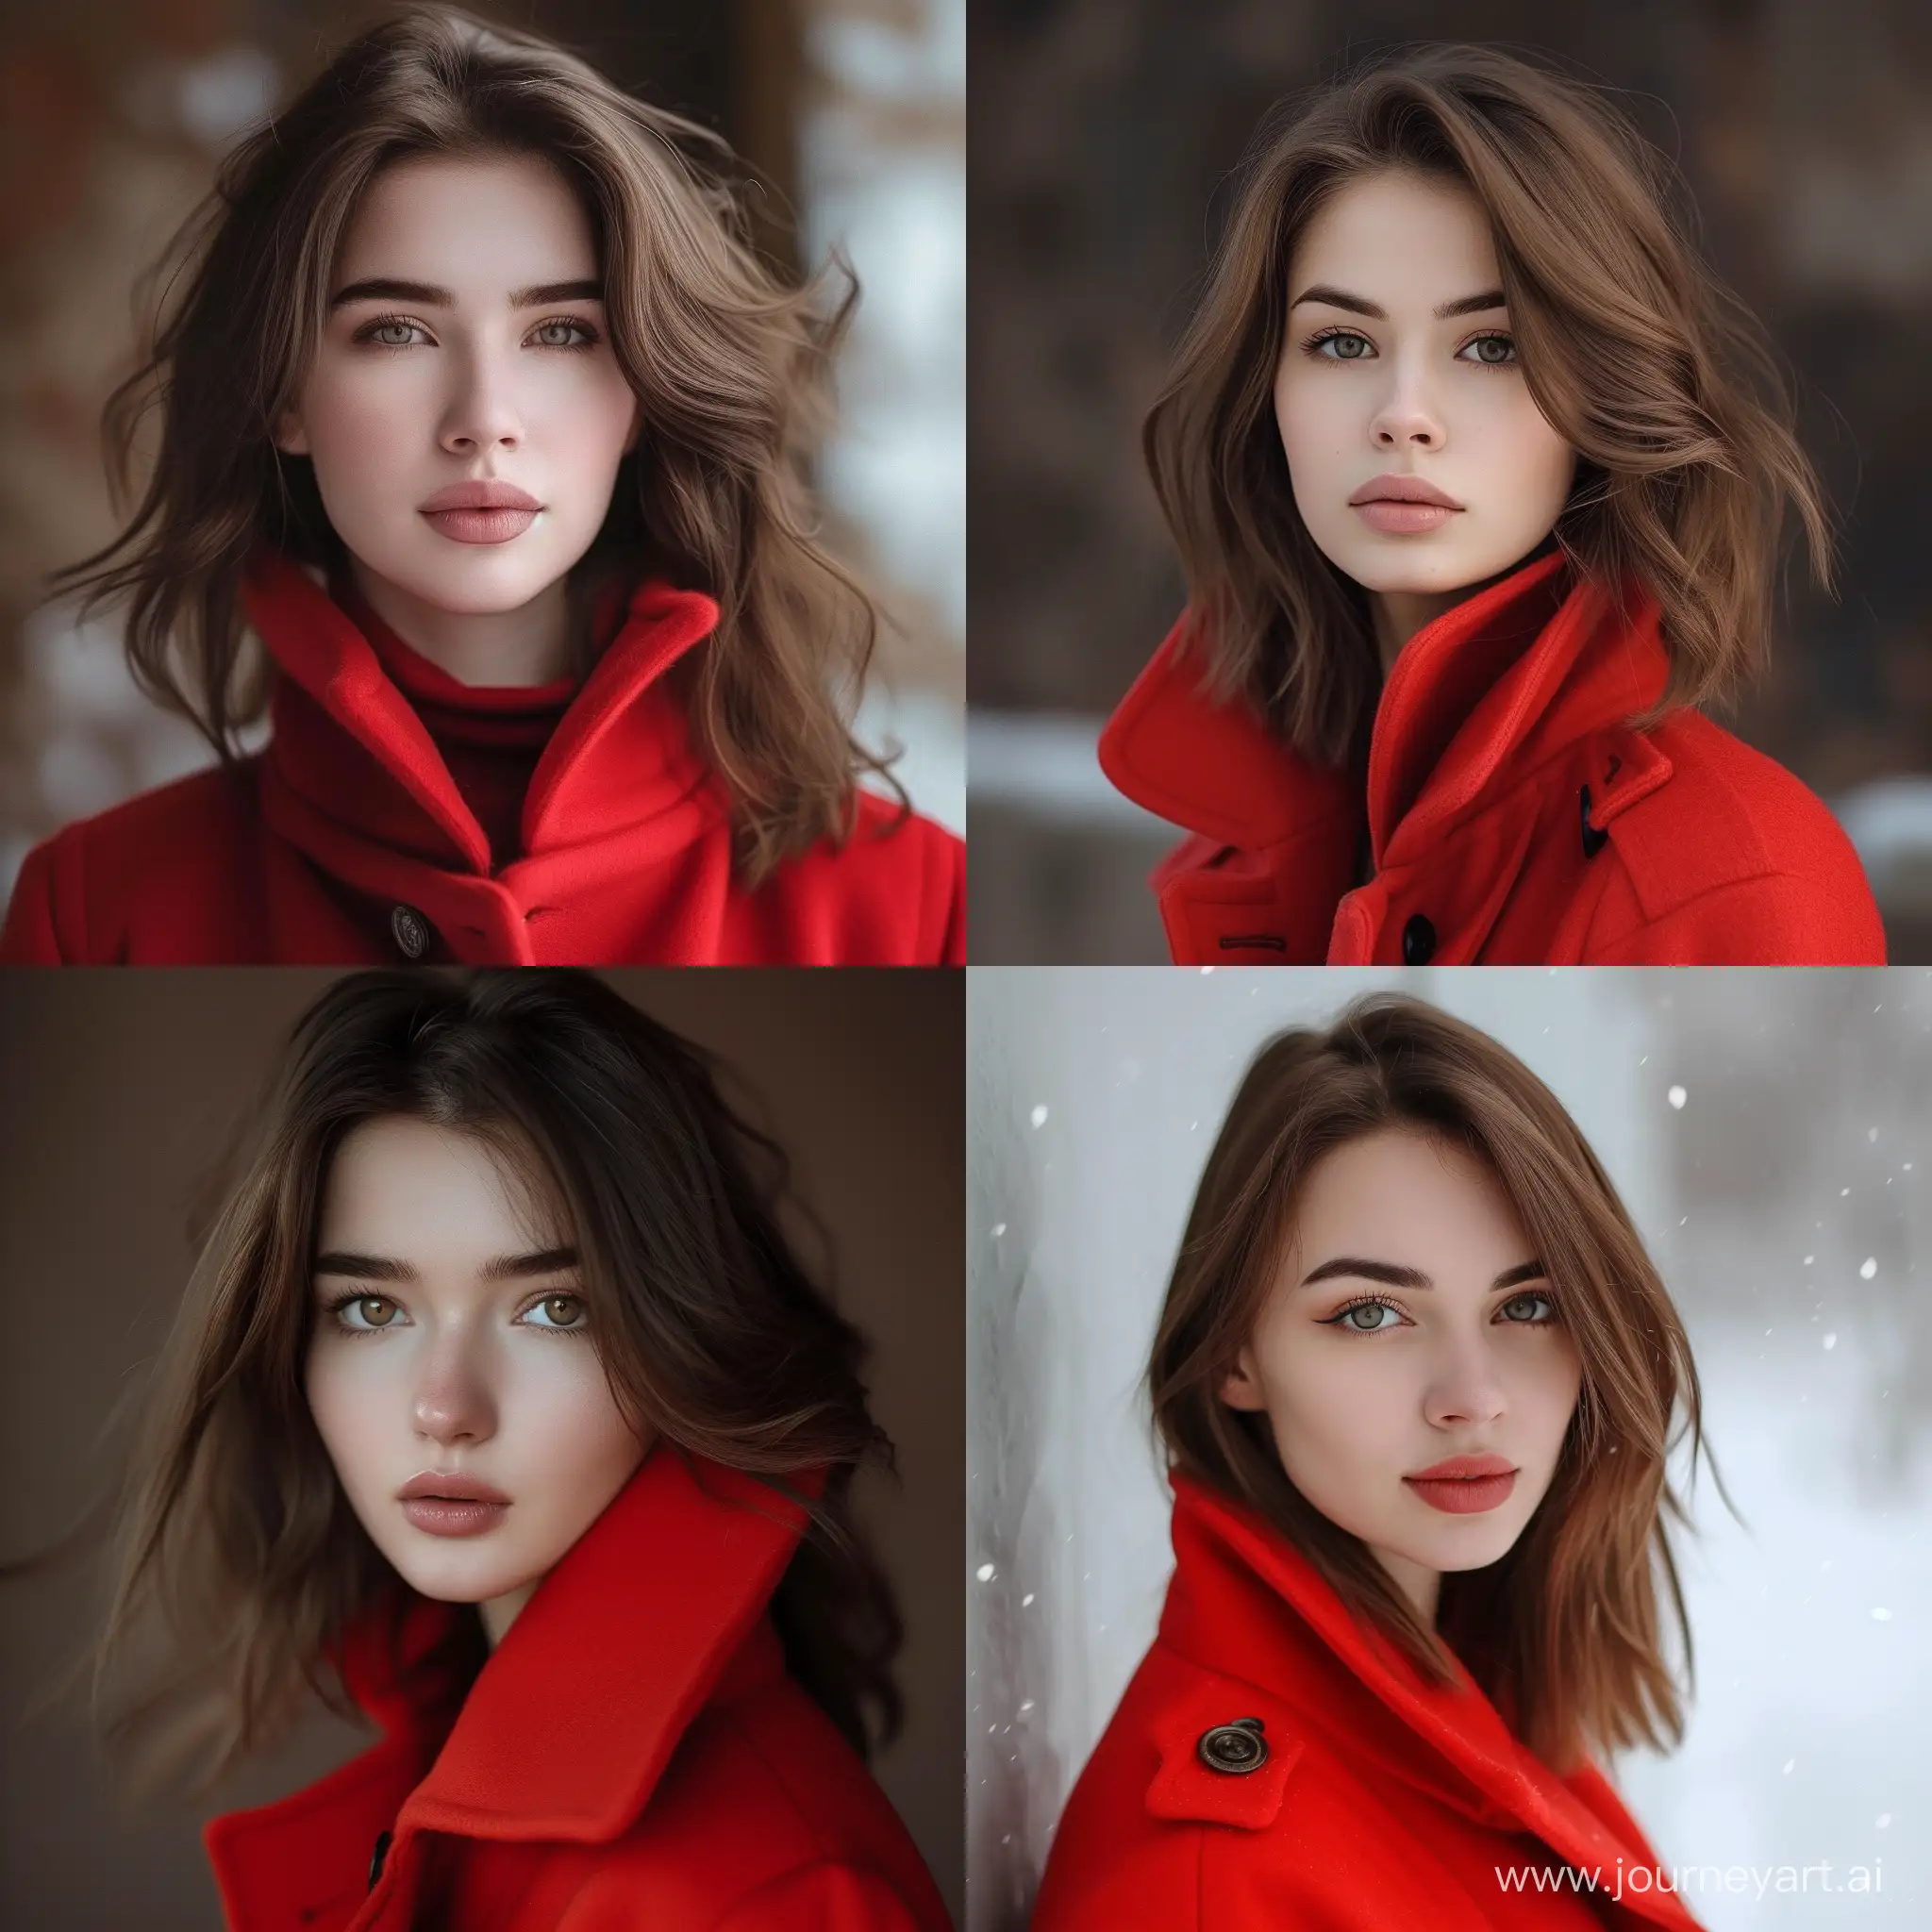 A Russian girl with brown hair, wearing a red coat, and possessing a flawless face is a beautiful female model. Her facial features are exceptionally beautiful, making her a very attractive young woman who is both youthful and cute. She is a beautiful model girl with a striking appearance, resembling a very beautiful catgirl. At the age of 19, she is a cute and youthful young woman. She is a sweet and adorable virtual YouTuber, similar to Dilraba Dilmurat, and is only 18 years old.